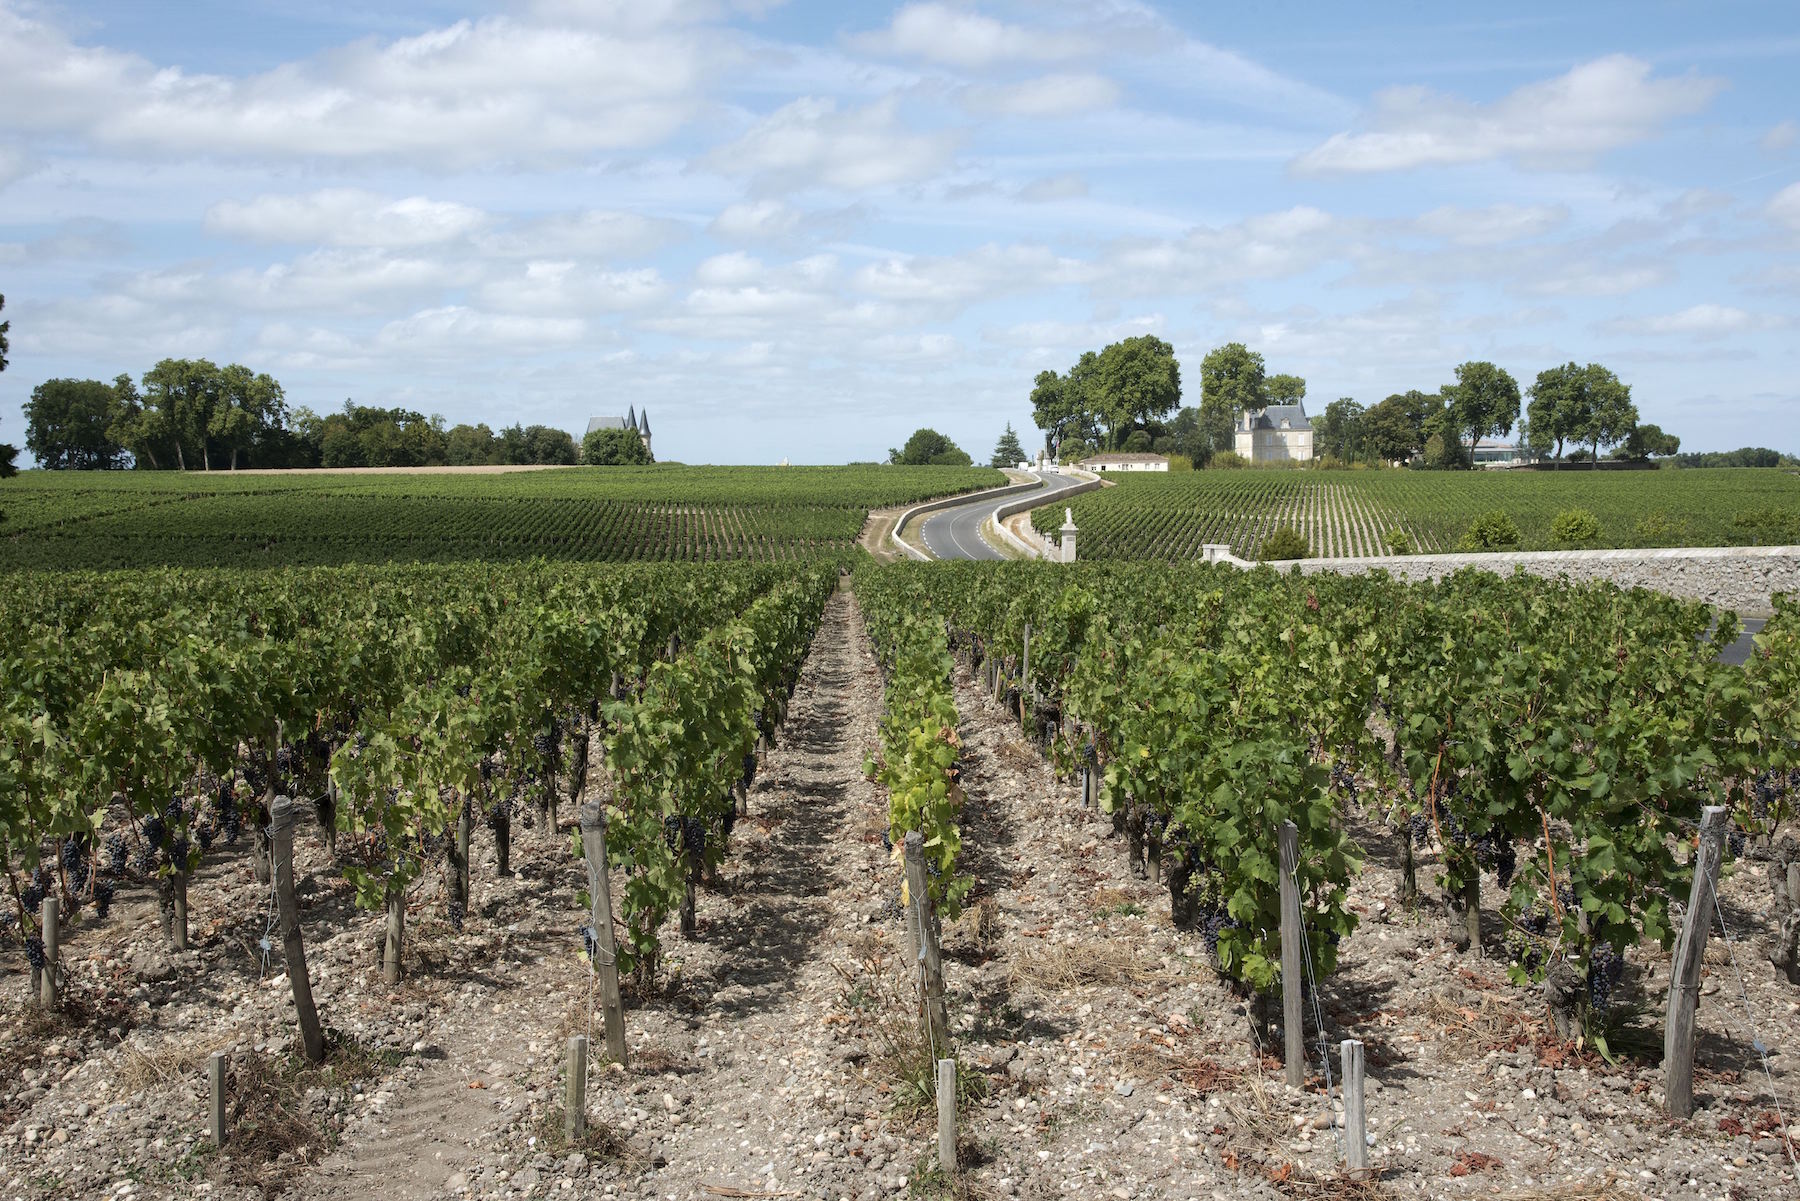 Pauillac wine region France, Vines and vineyards in Pauillac a wine producing area of the Bordeaux region France. (Photo by: Education Images/UIG via Getty Images)